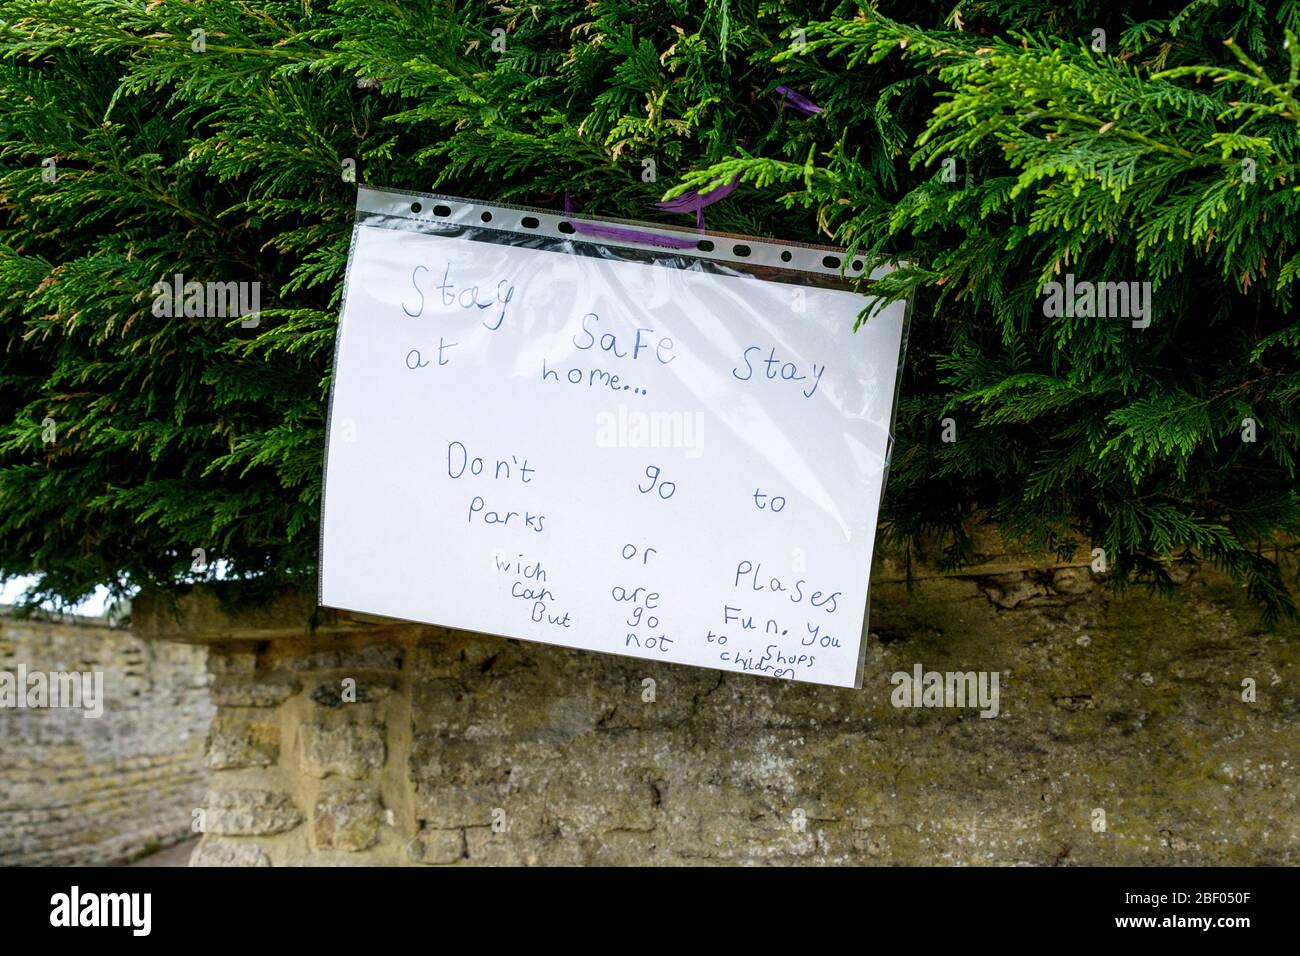 Chippenham, Wiltshire UK, 16th April, 2020. With the nation due to once again clap to show their support for the NHS tonight, a childs handwritten sign telling people to stay in and stay safe is pictured on a hedge in Chippenham, Wiltshire. Credit: Lynchpics/Alamy Live News Stock Photo